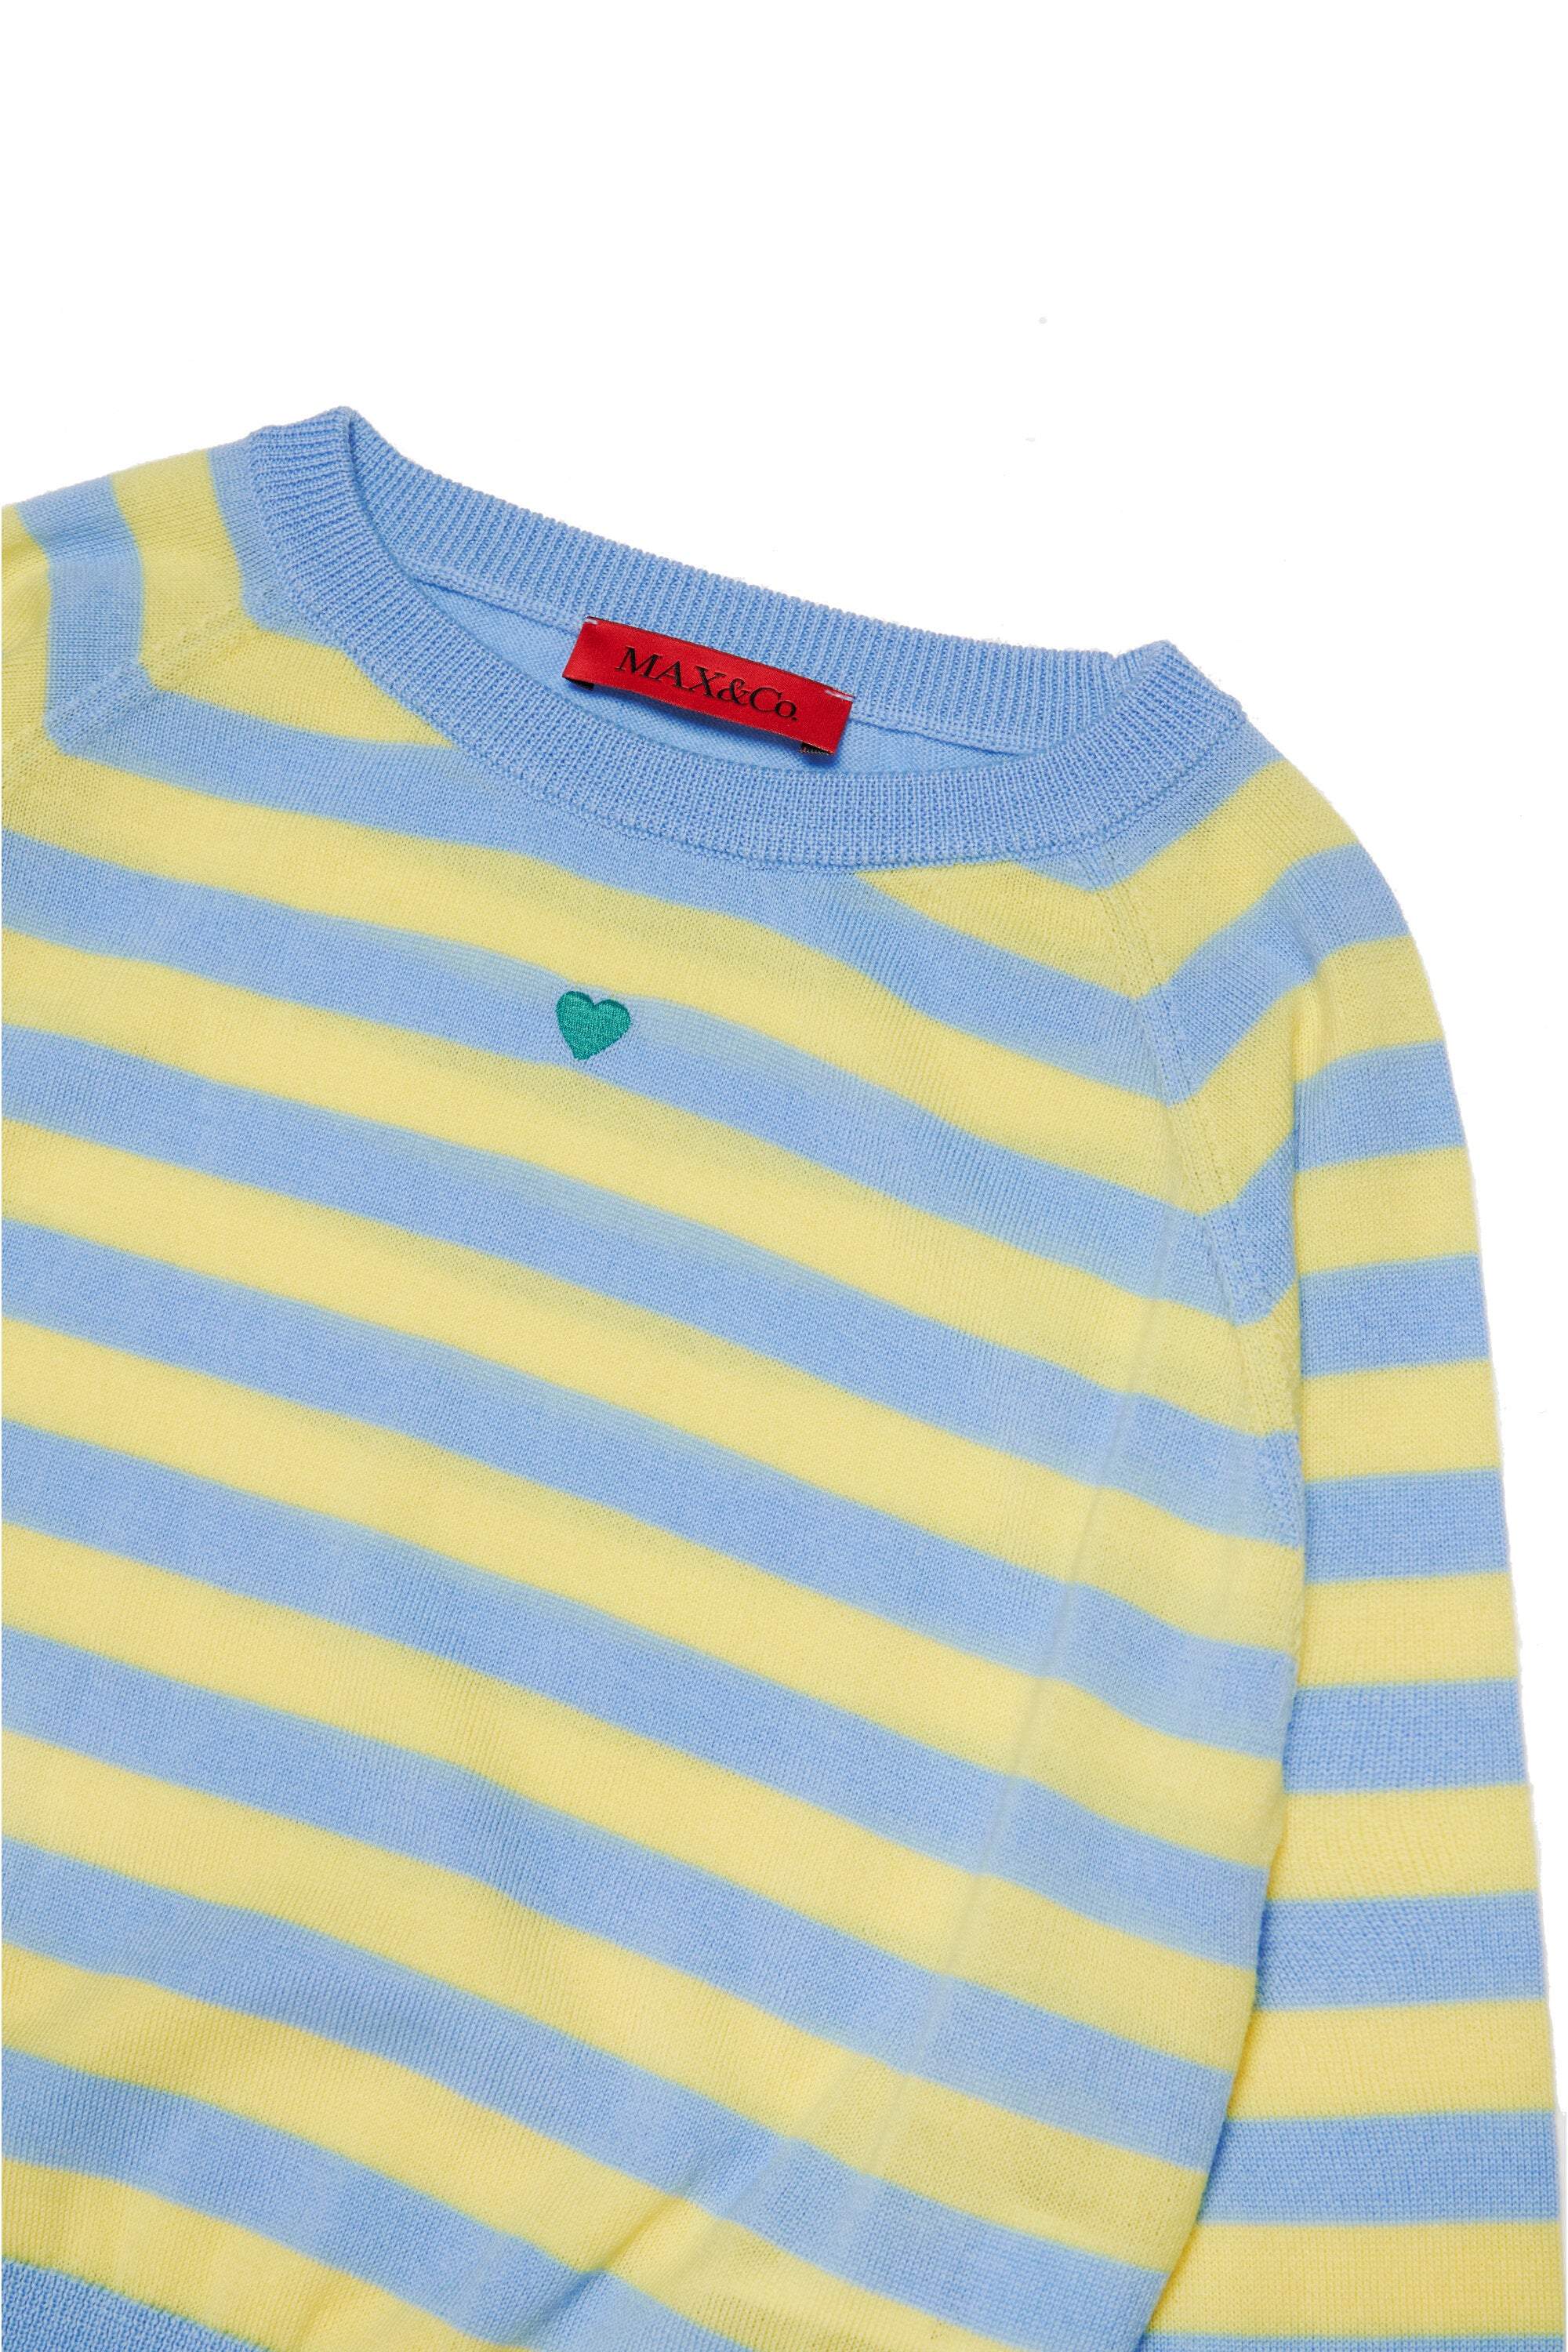 Wool crew-neck pullover with stripes